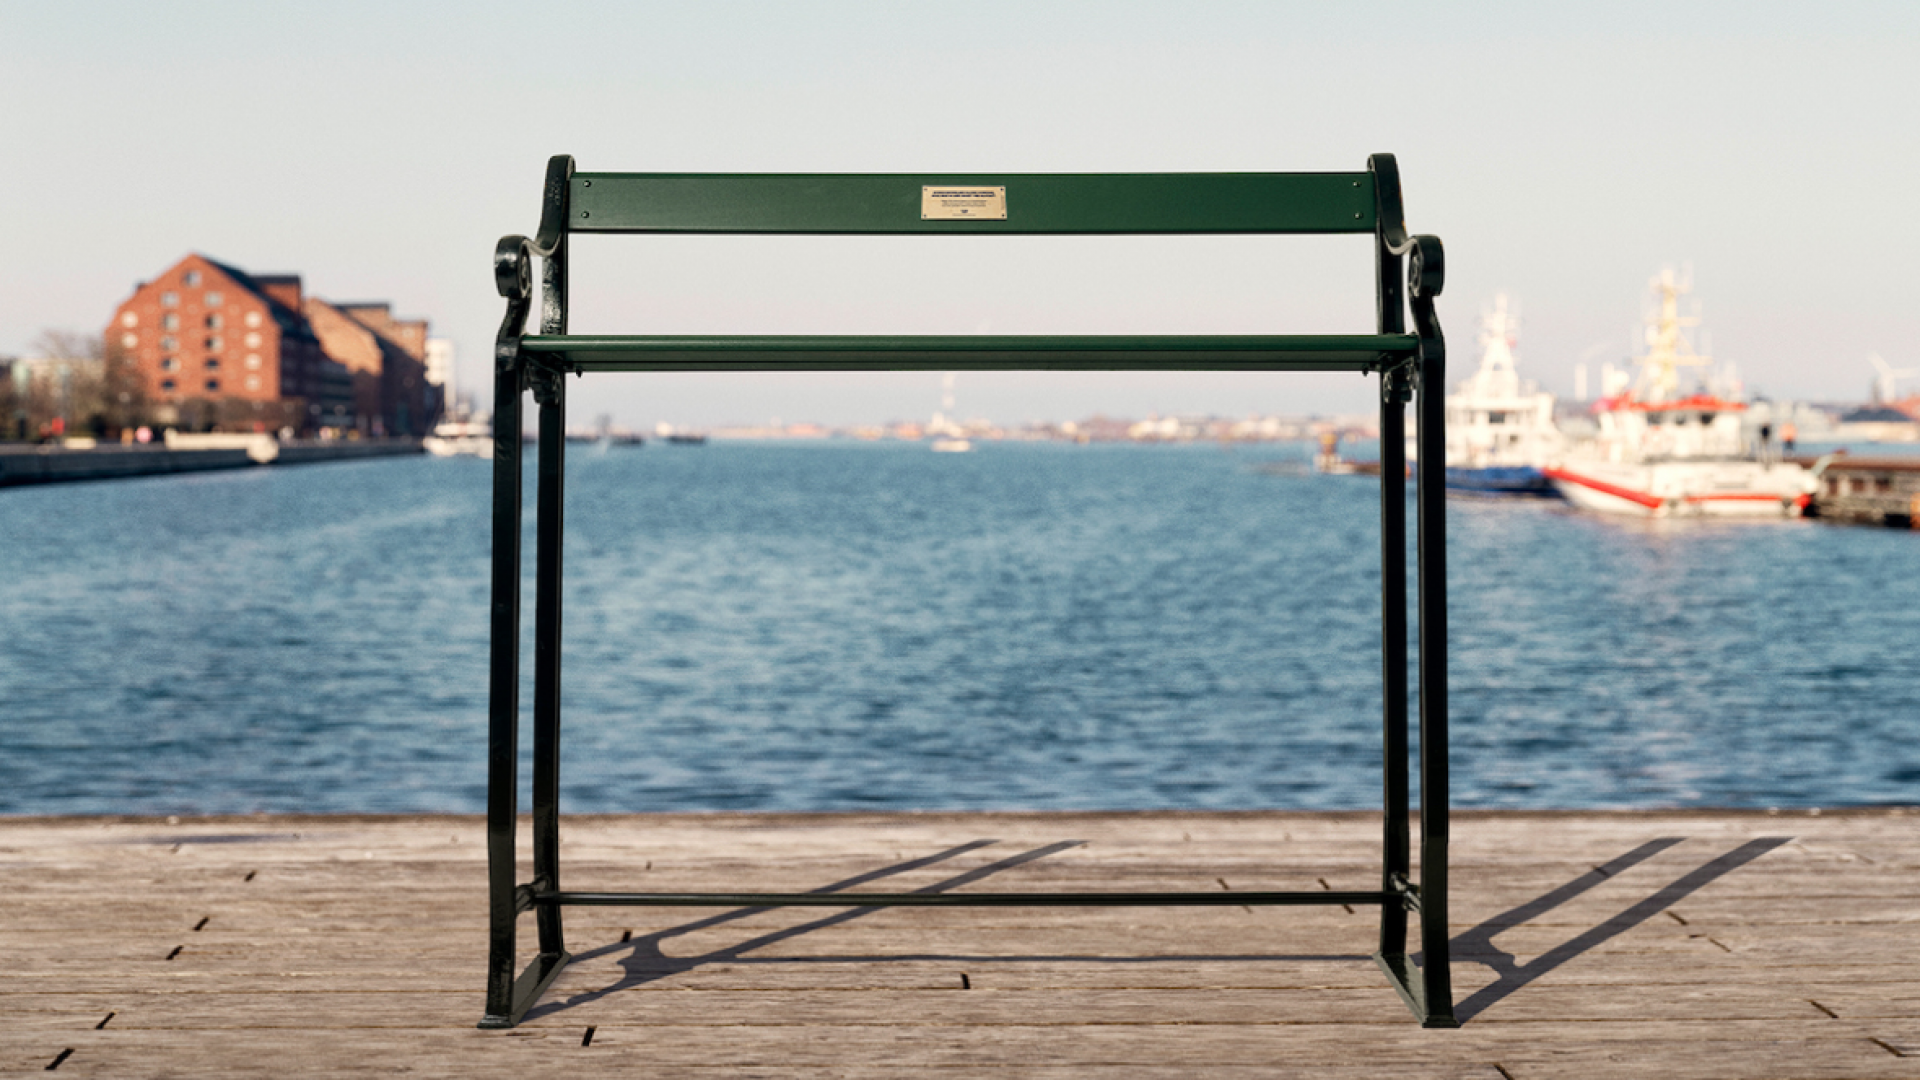 Park benches in Copenhagen have been raised to show future sea-level rise. Image: Maria Schumann & Kristian Vestergaard